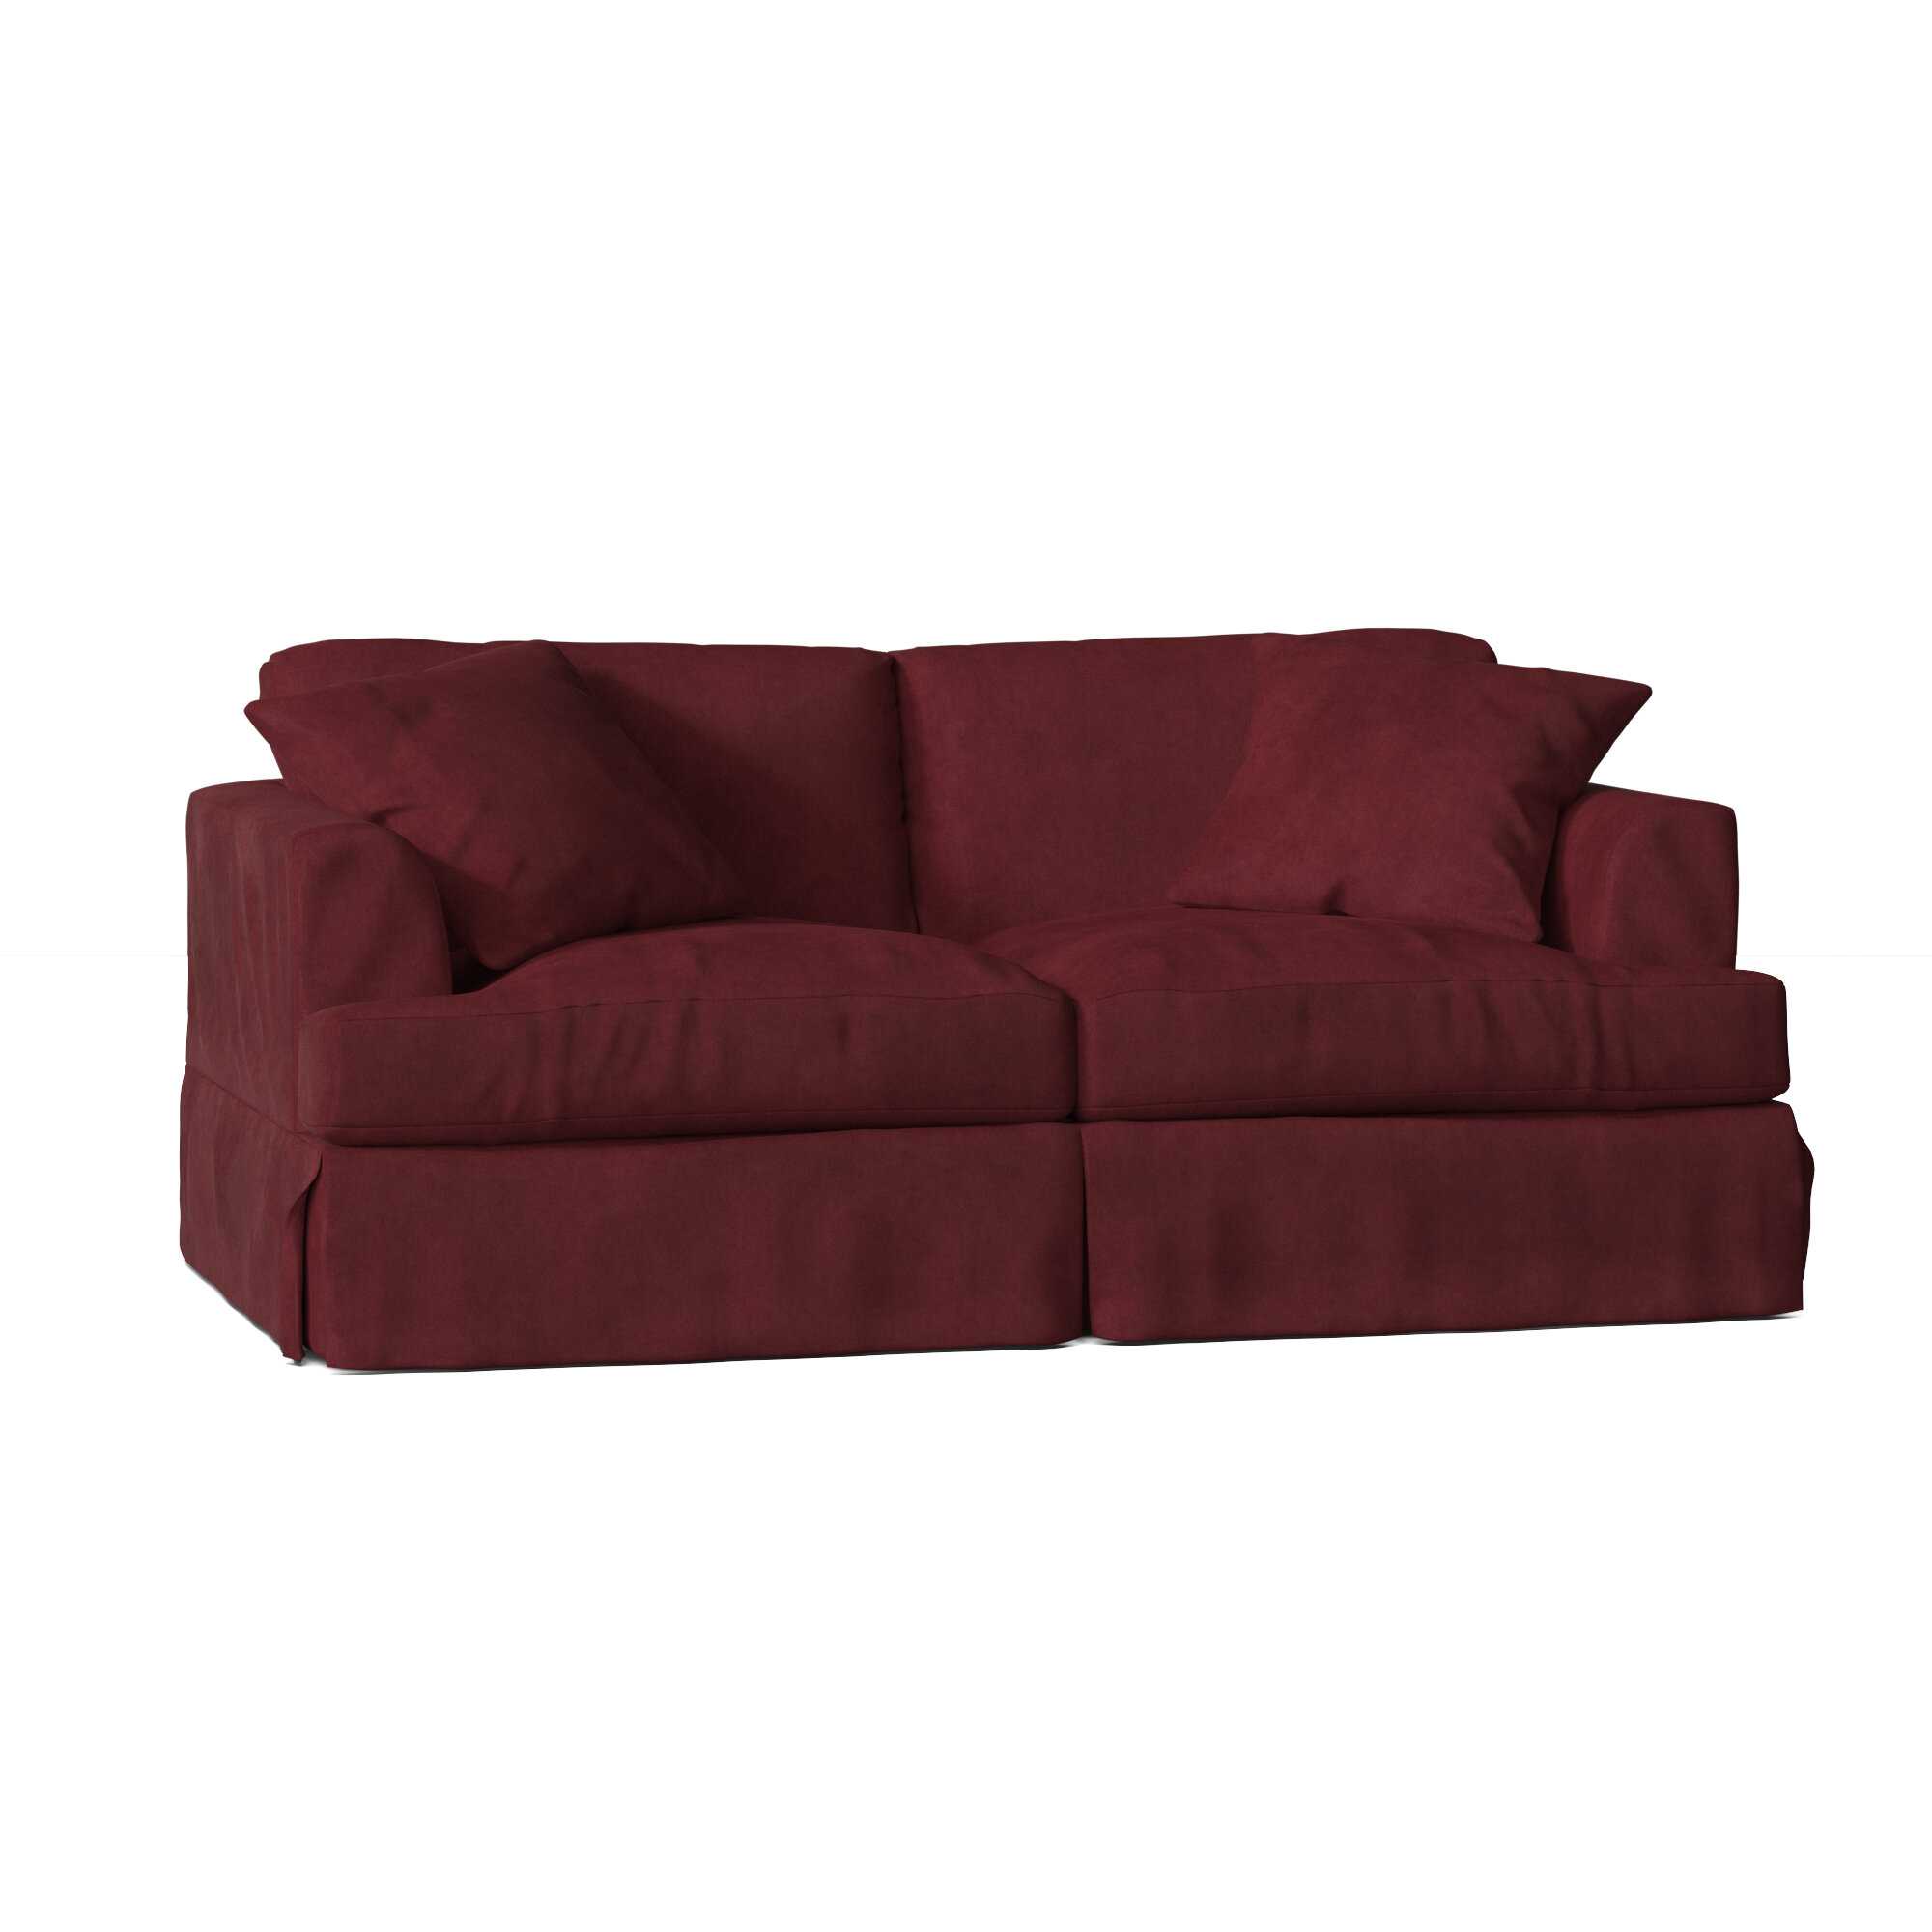 Lucia 68” Recessed Arm Slipcovered Loveseat with Reversible Cushions